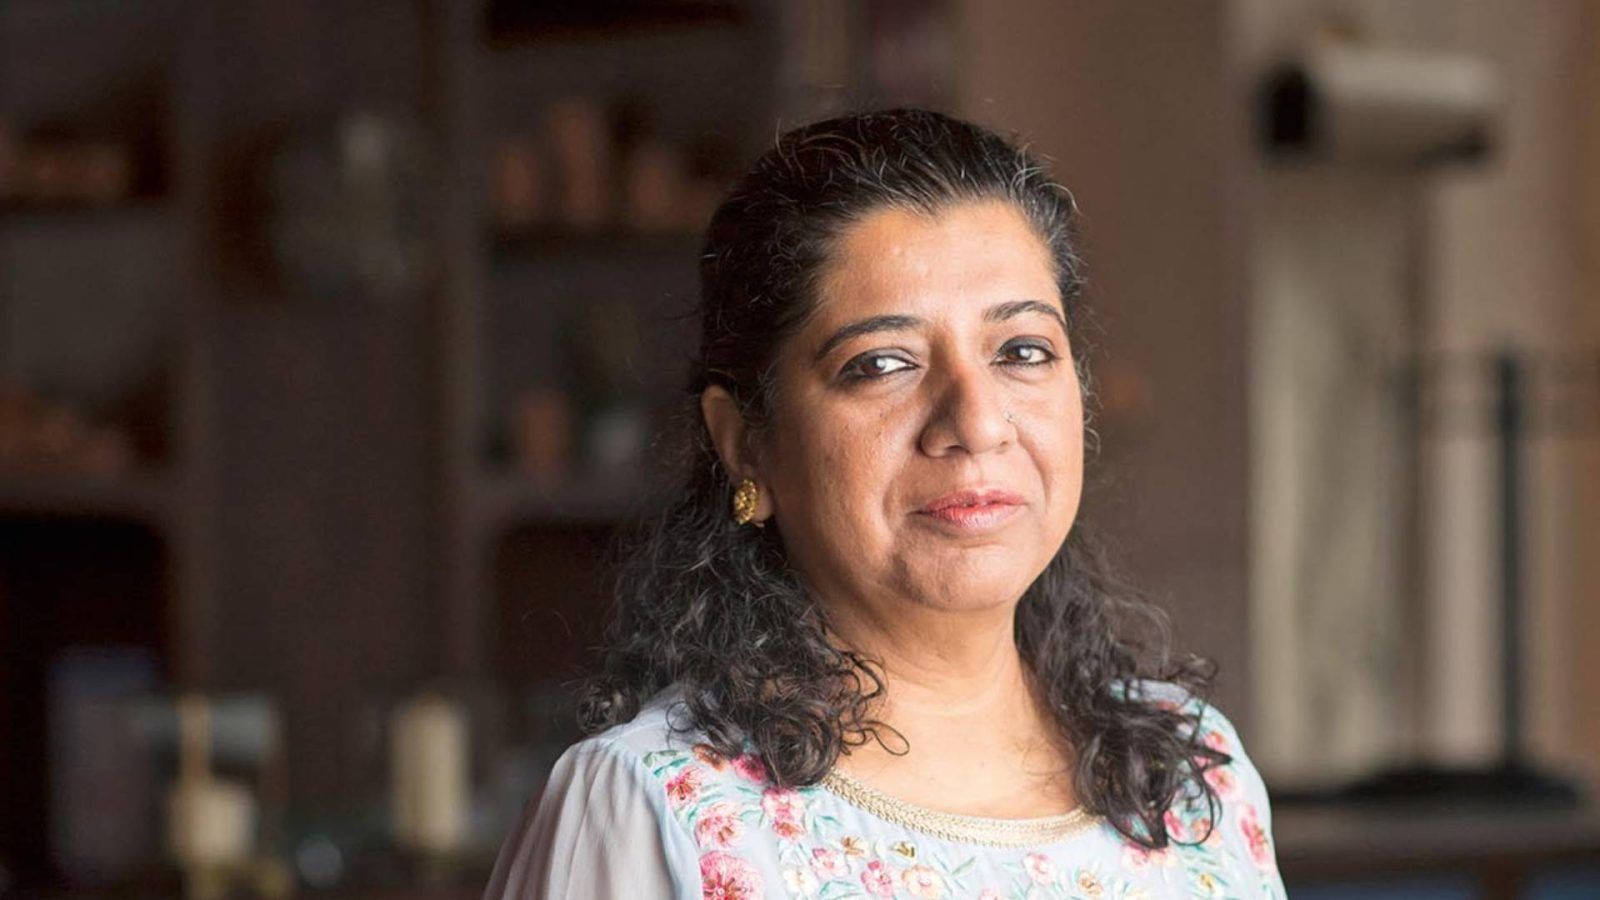 Interview With Chef Asma Khan On Finding Success In The Culinary World